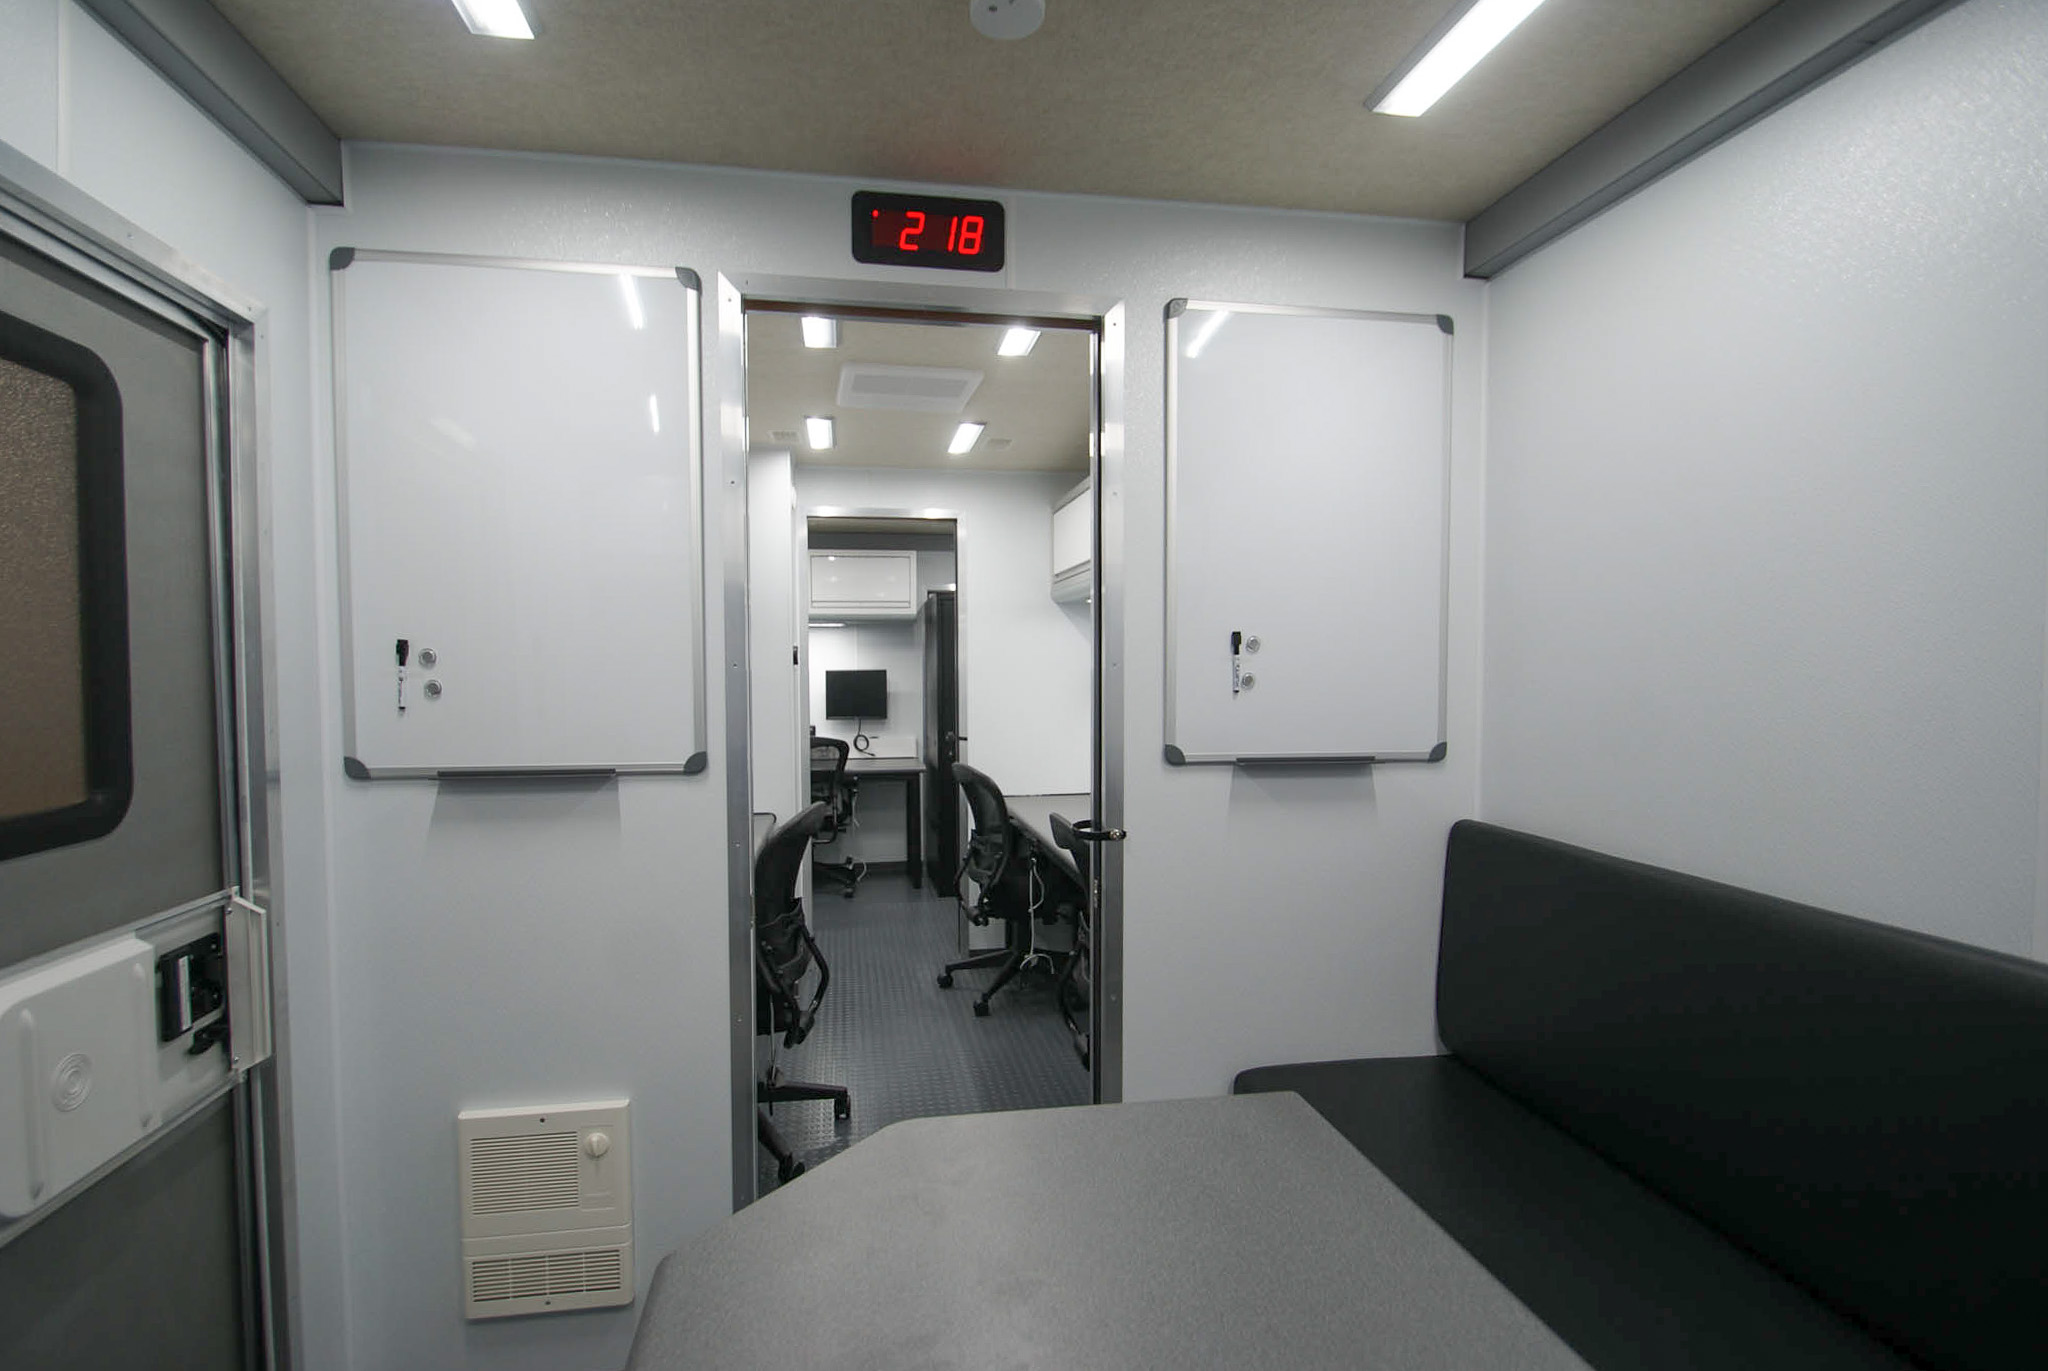 A view of the mounted whiteboards inside the conference room of the unit for Delhi, NY.